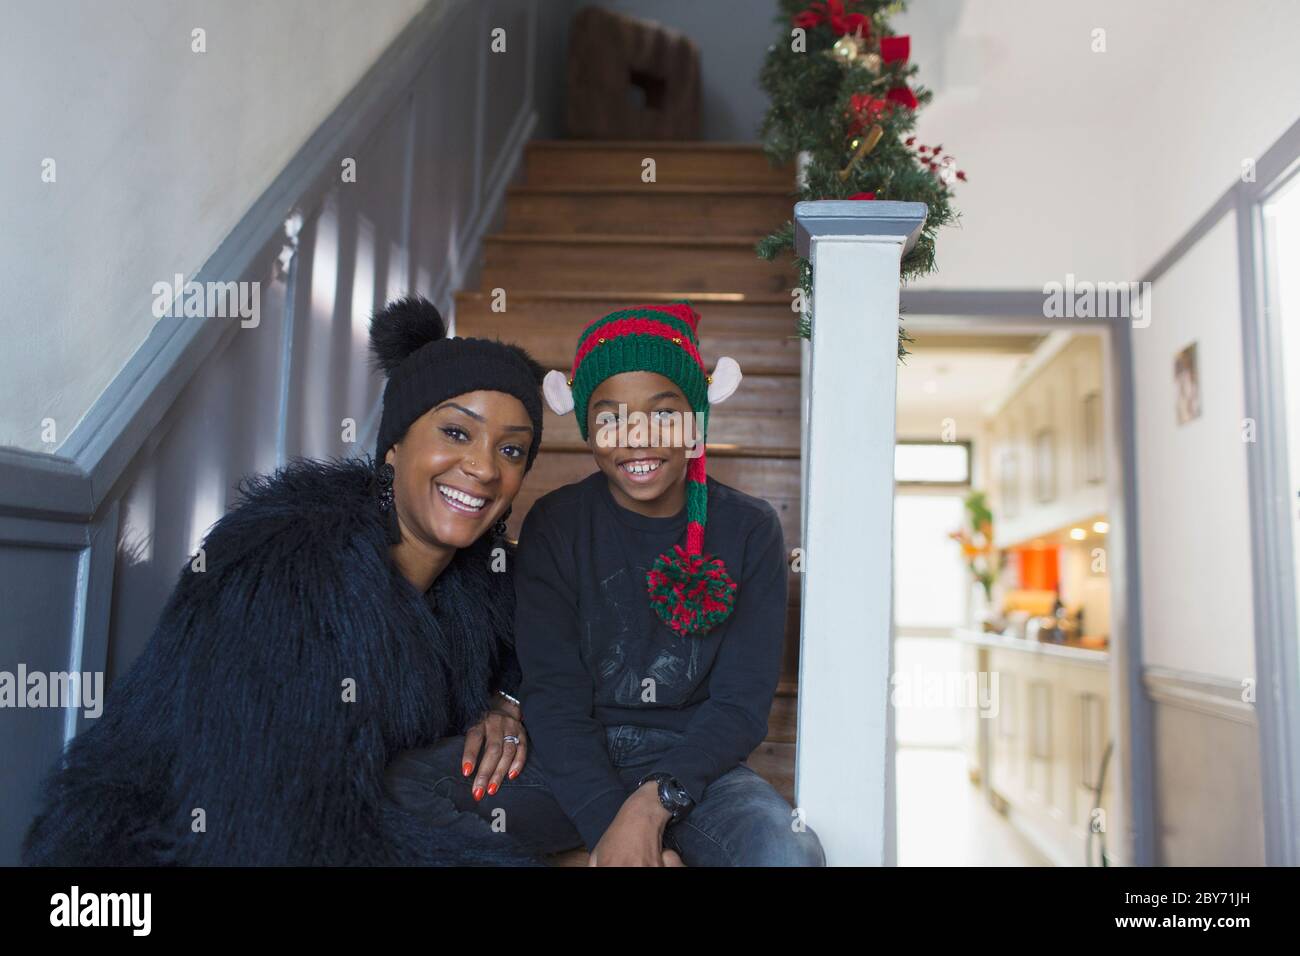 Portrait happy mother and son wearing Christmas hats on staircase Stock Photo